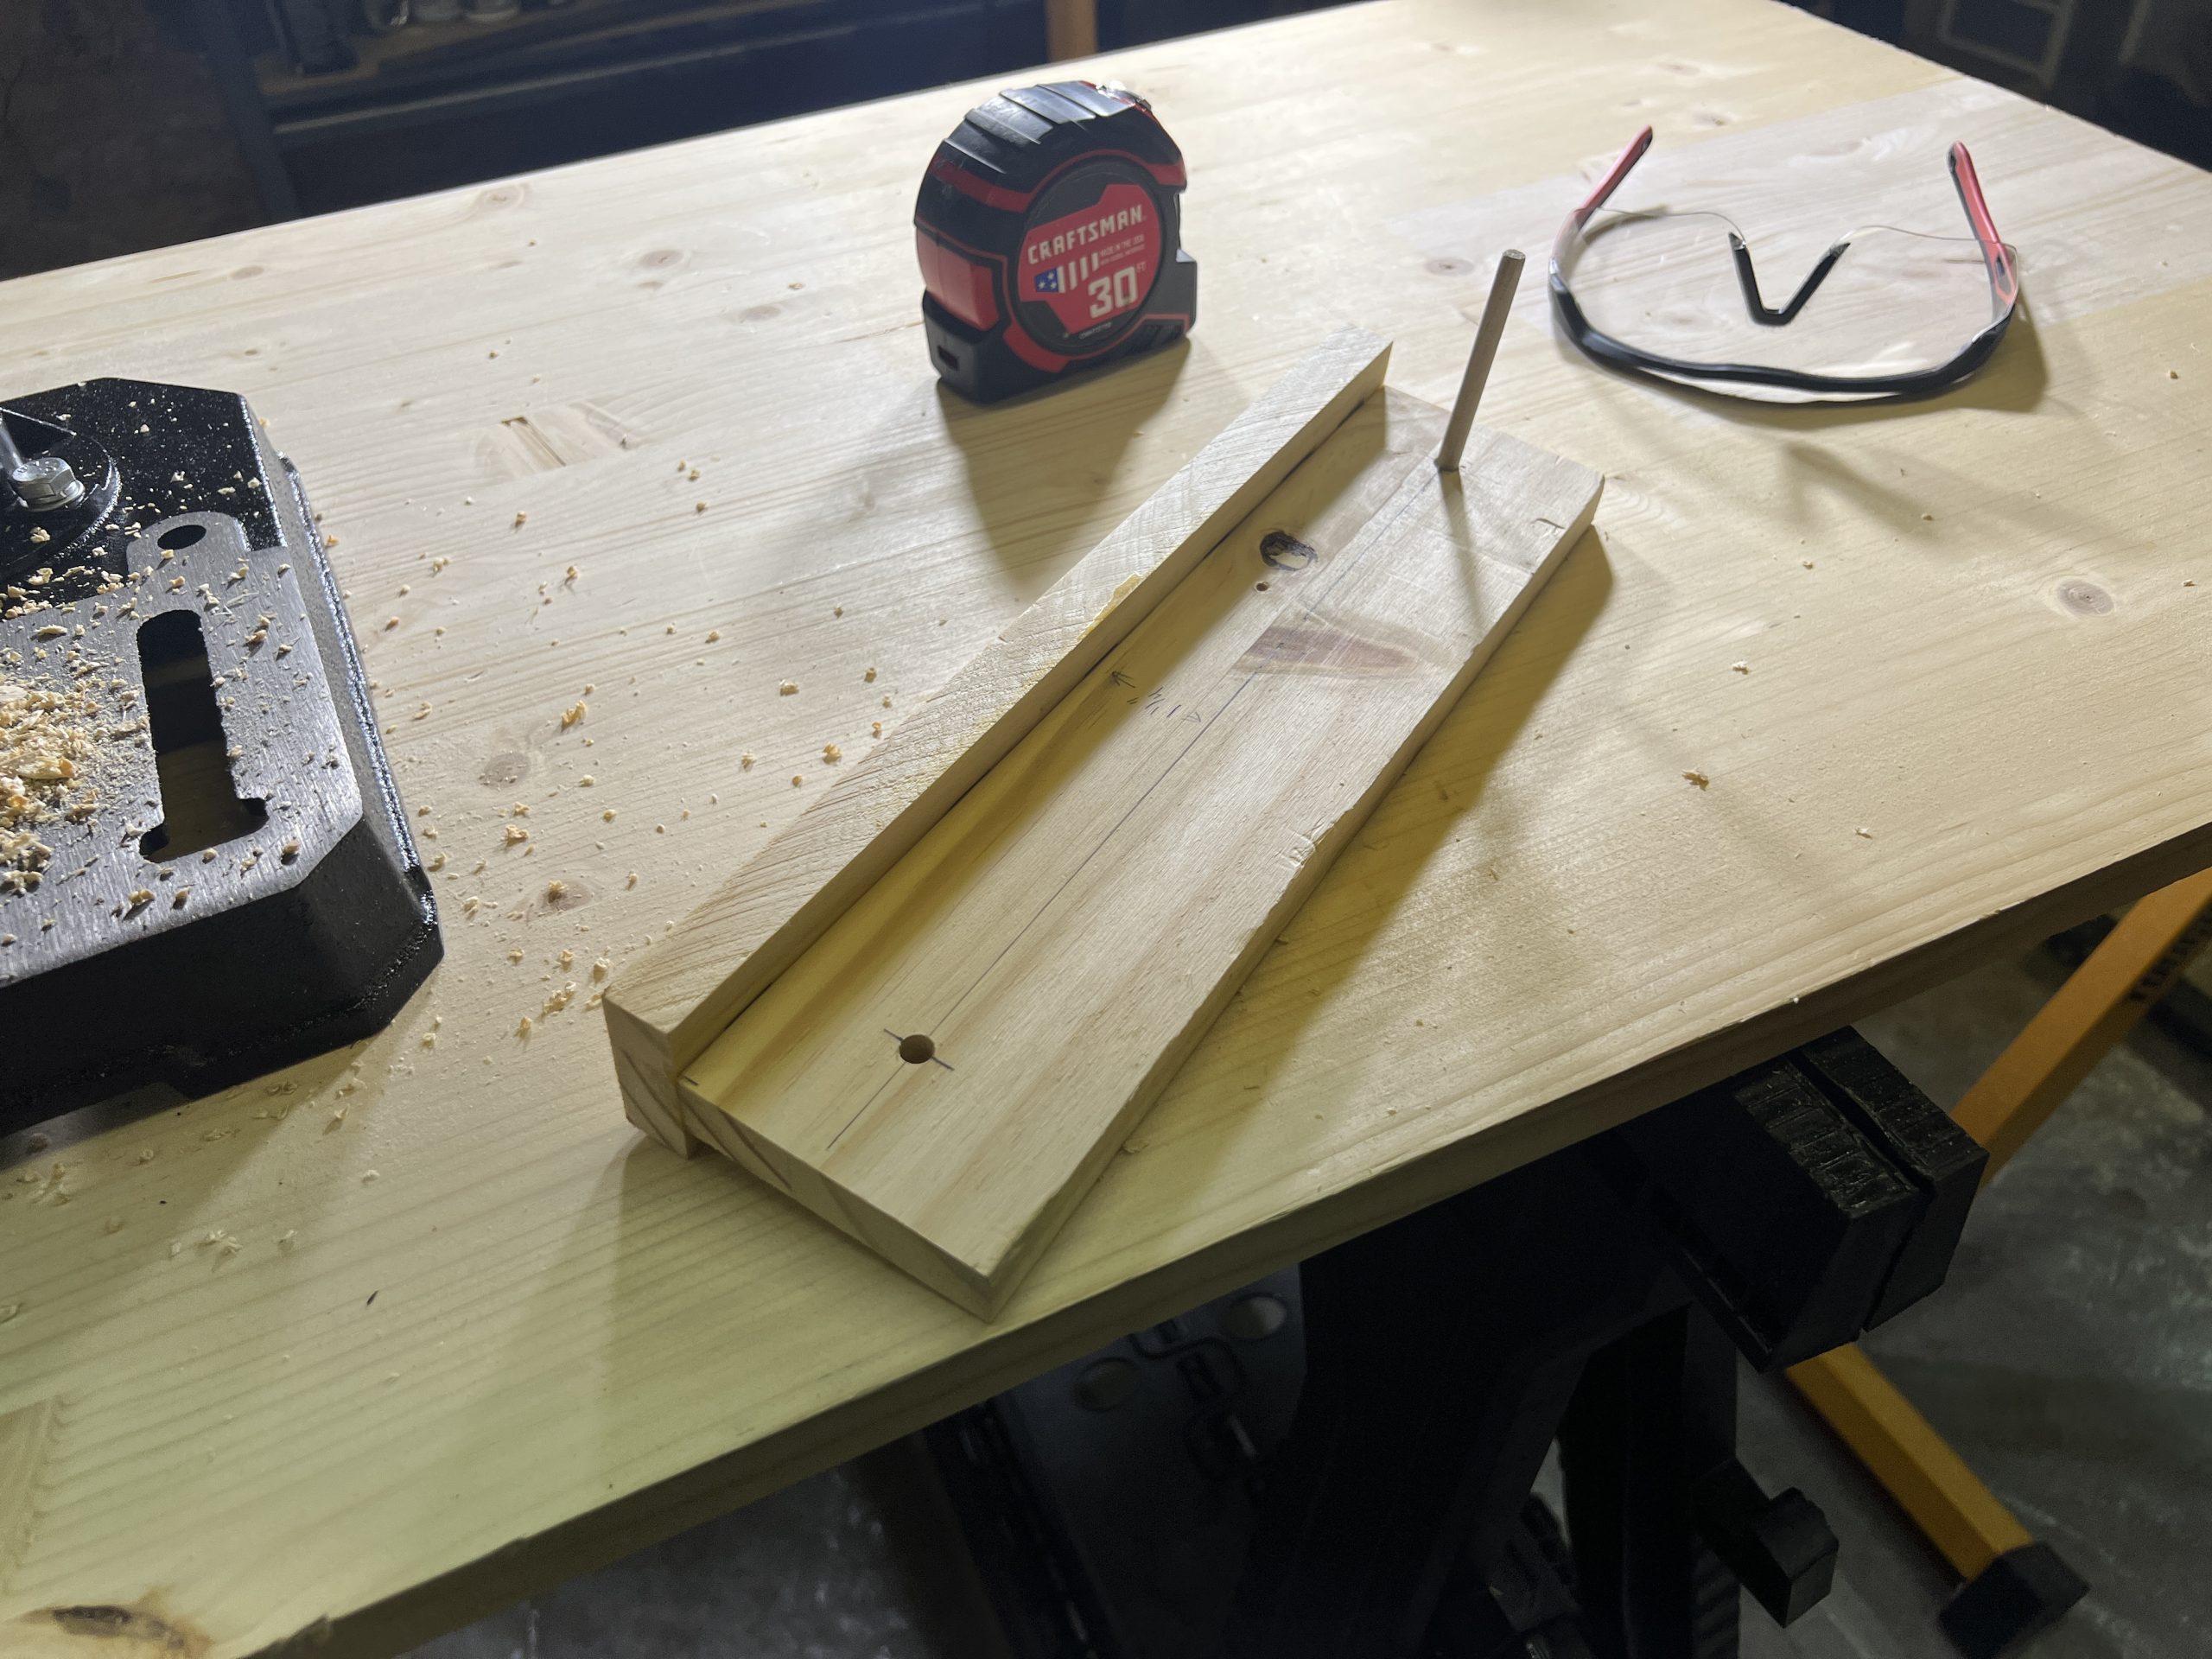 The small jig is made from a 12 inch long board with two holes drilled at the proper spacing.